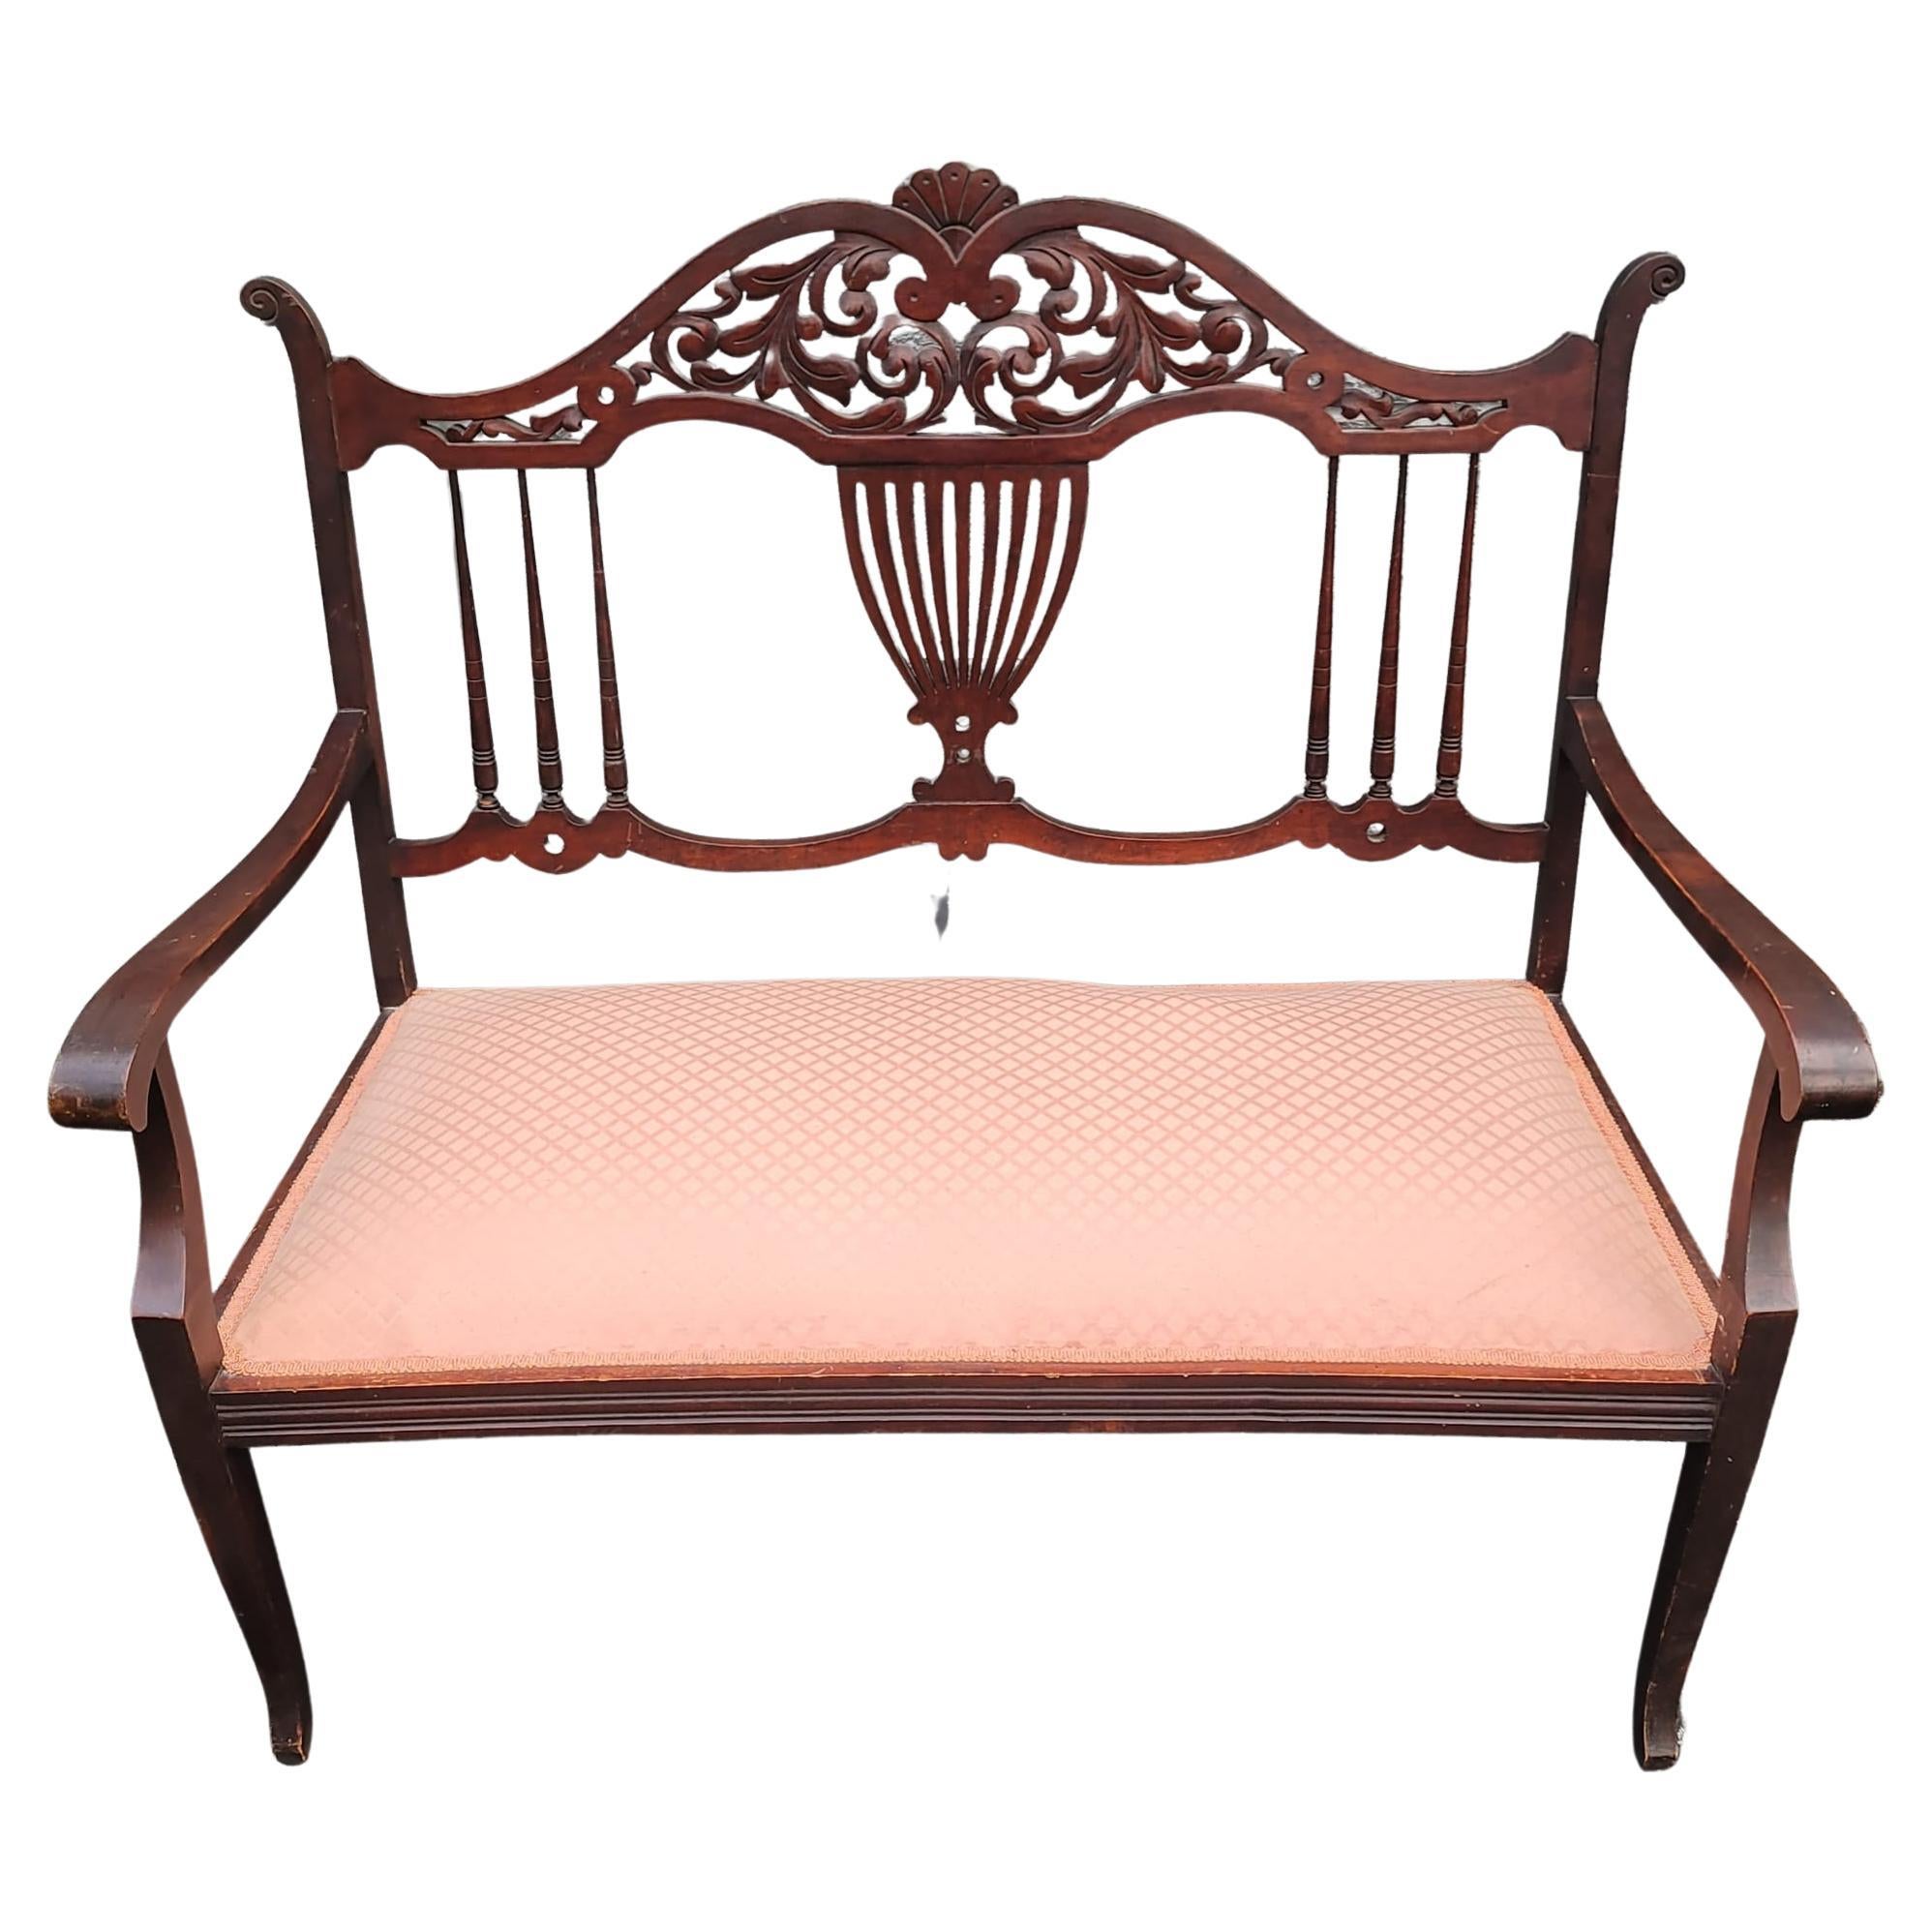 Early 20th Century Regency Carved mahogany and Upholstered settee. It measures 40.75